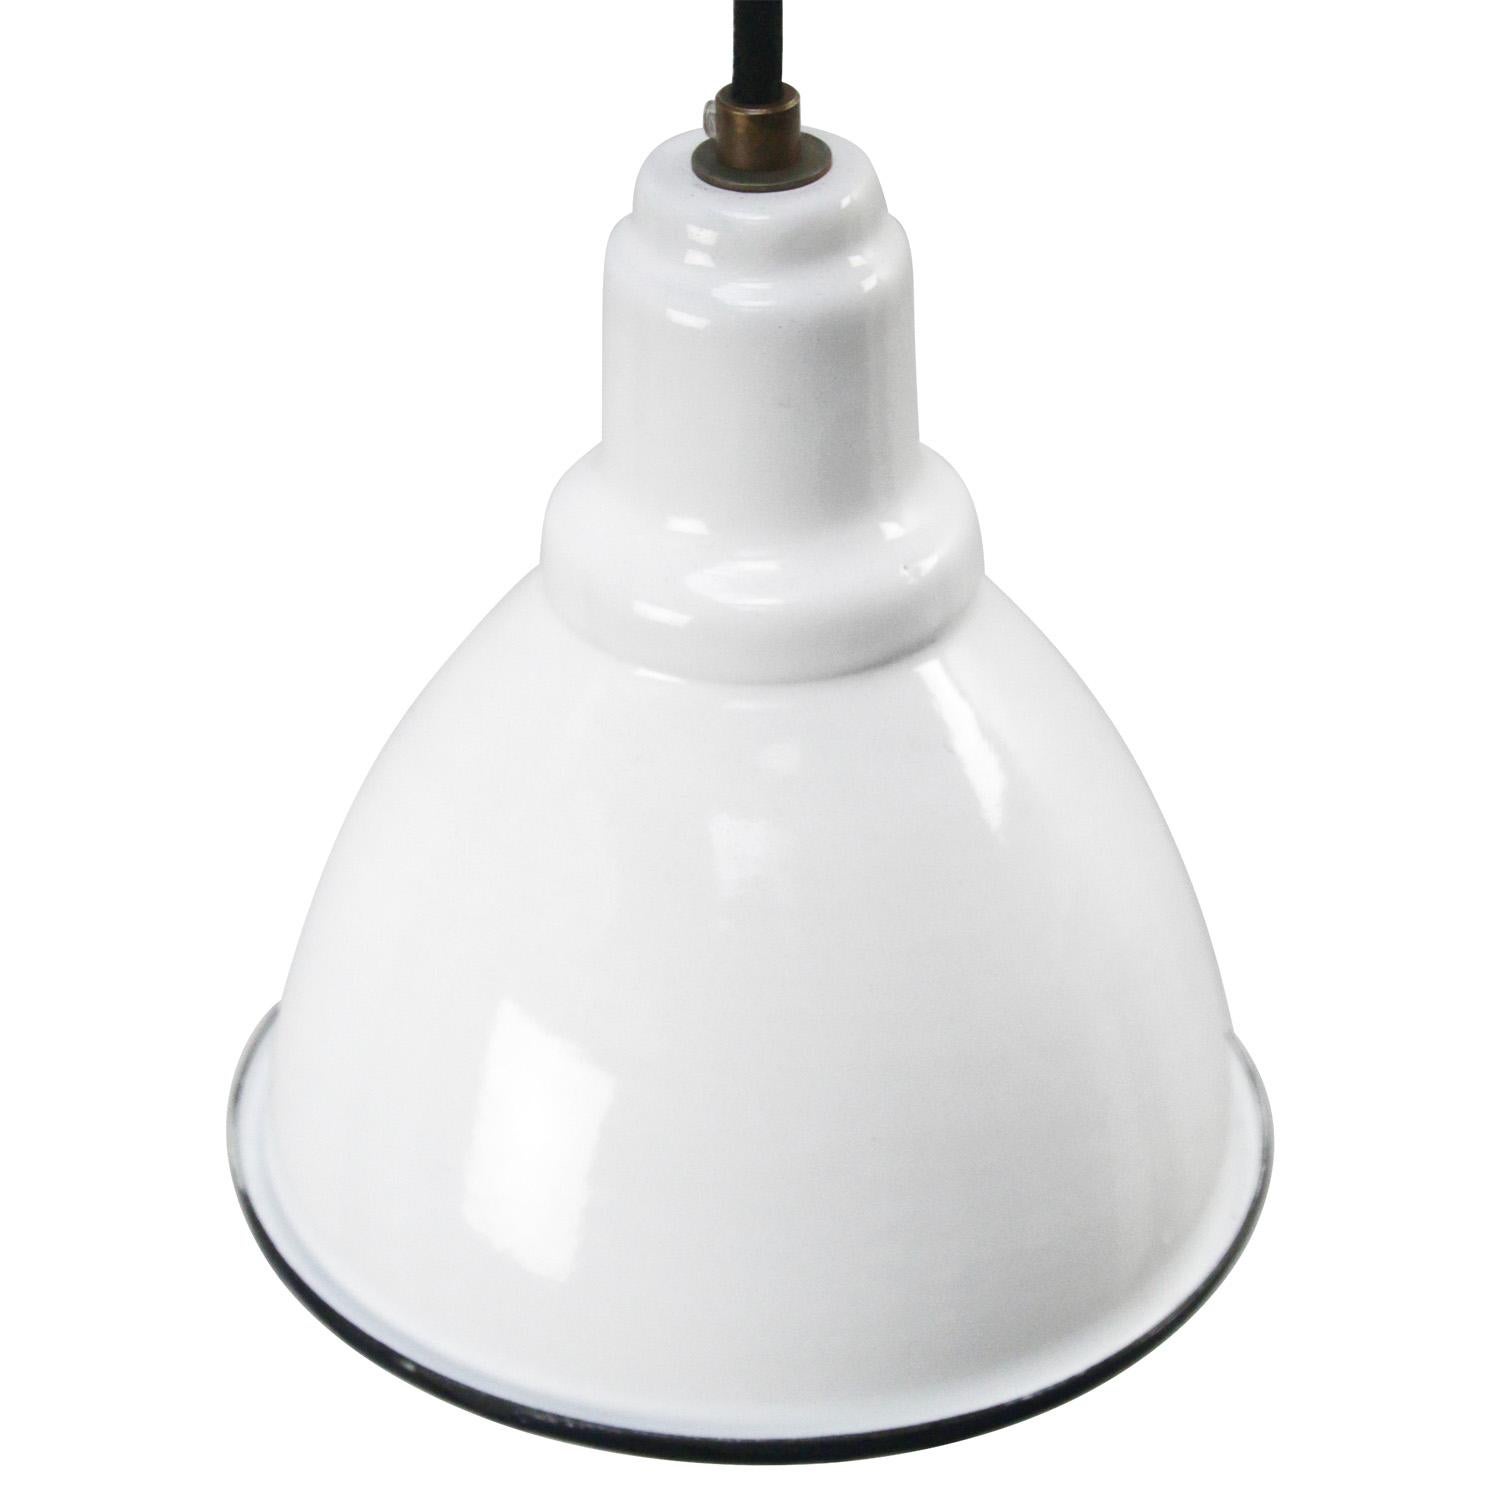 Small factory hanging light. White enamel. White interior.
Brass strain relief with two meter wire.

Measure: Weight: 0.6 kg / 1.3 lb

Priced per individual item. All lamps have been made suitable by international standards for incandescent